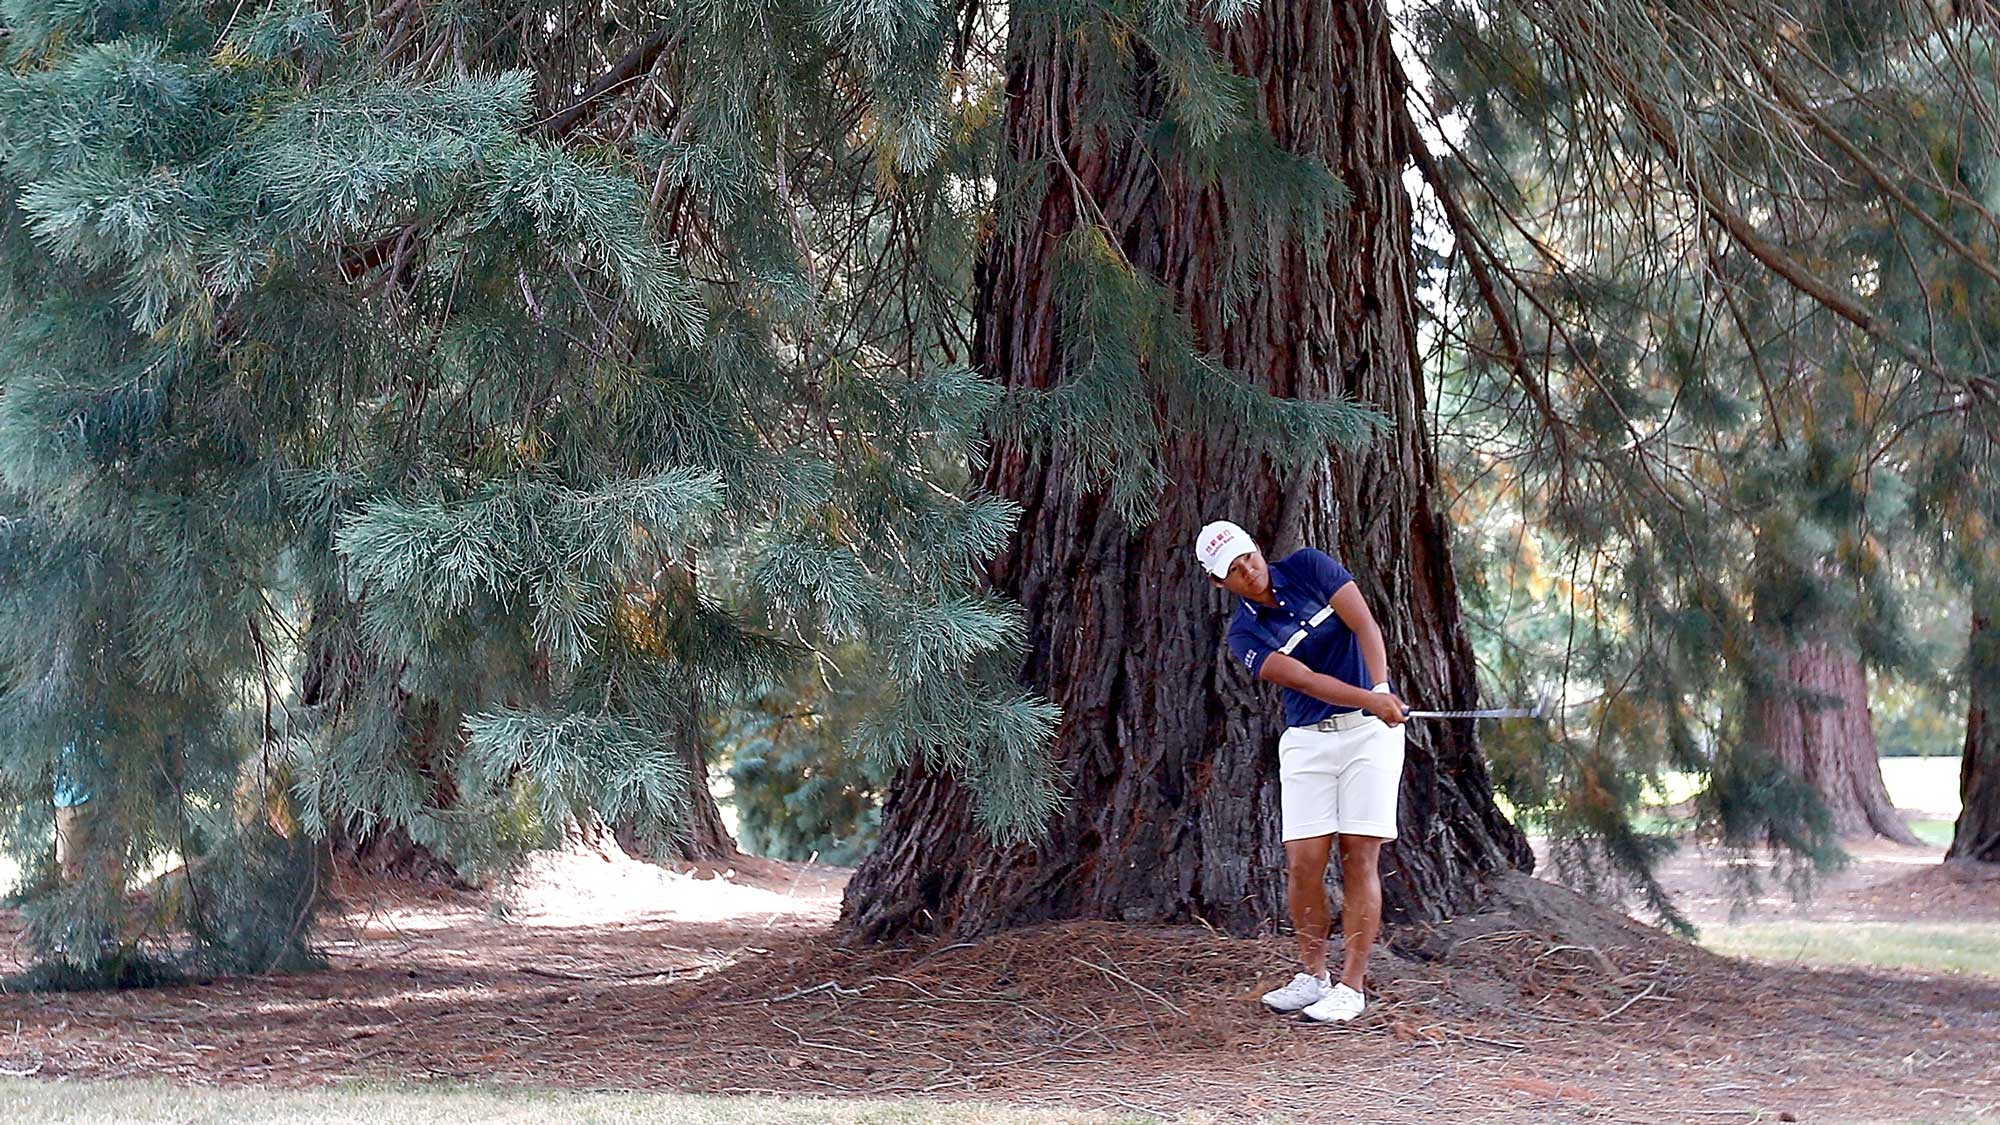 Yani Tseng of Chinese Taipei hits out from under a tree on the 5th hole during the first round of the LPGA Cambia Portland Classic